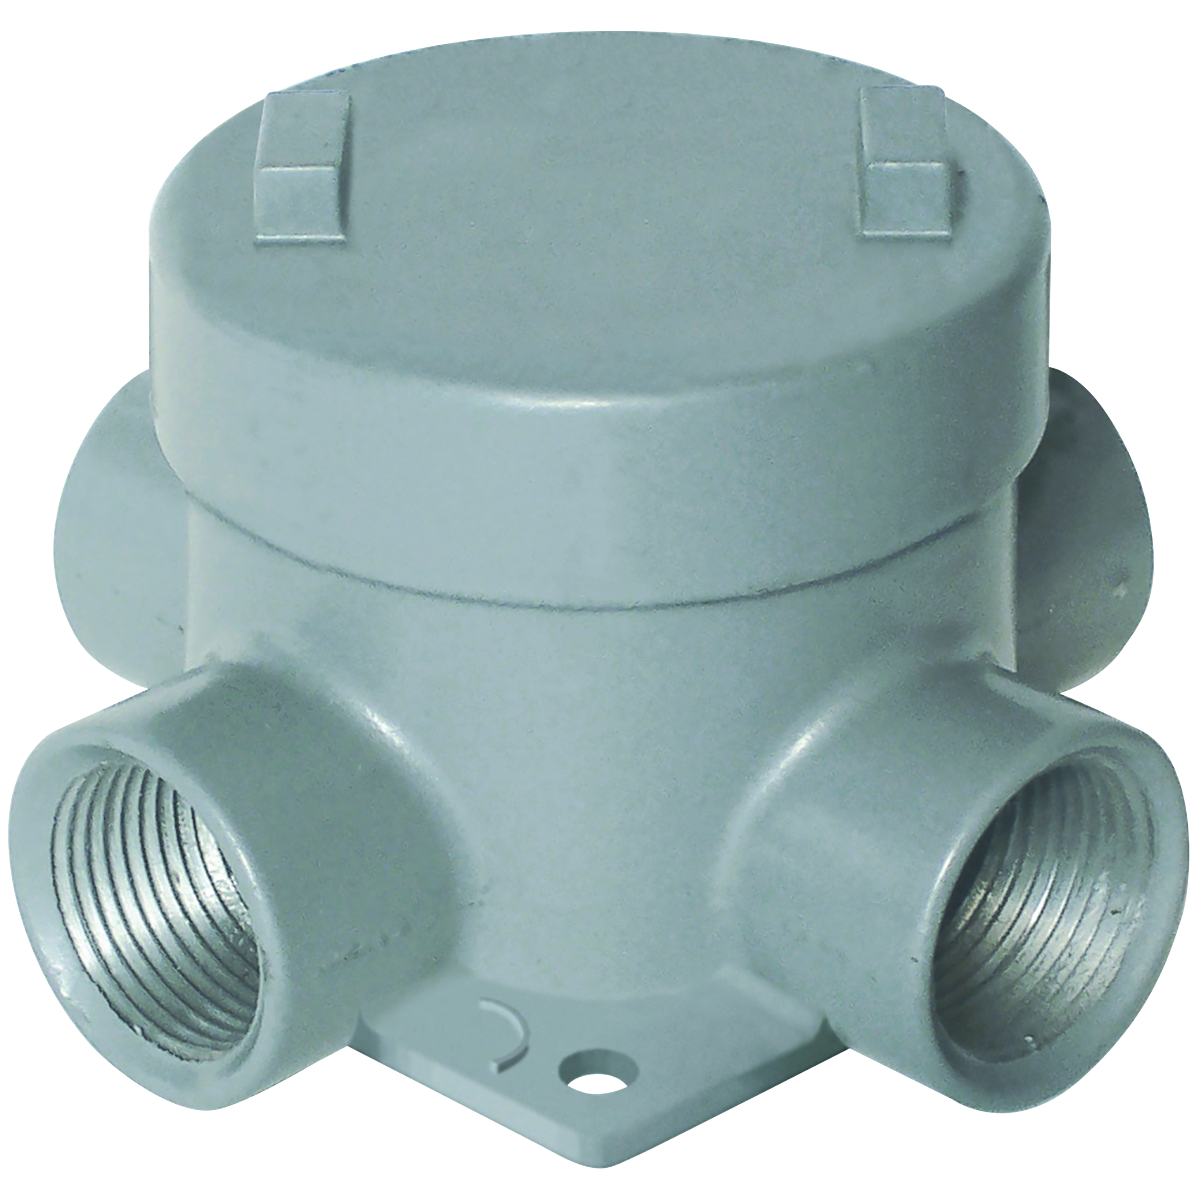 GEB SERIES - ALUMINUM OUTLET BODY - X TYPE - HUB SIZE 3/4 INCH - VOLUME29.0 CUBIC INCHES